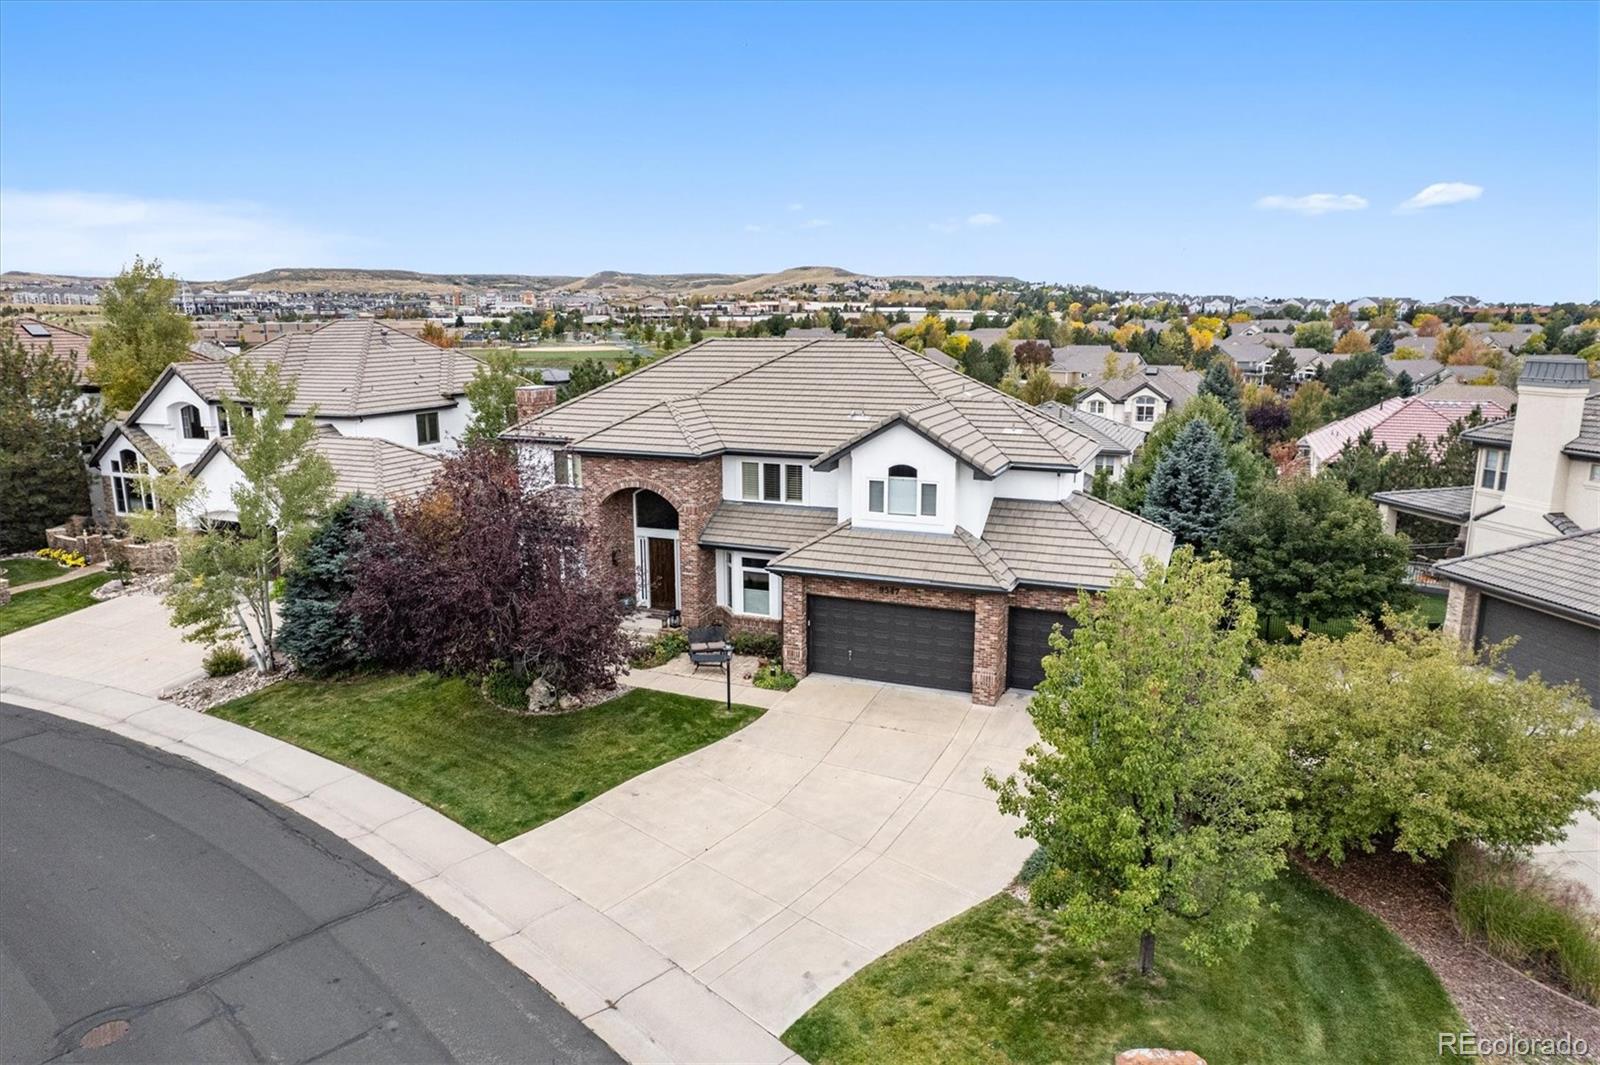 9547 S Shadow Hill Circle, lone tree MLS: 4401643 Beds: 5 Baths: 6 Price: $1,650,000